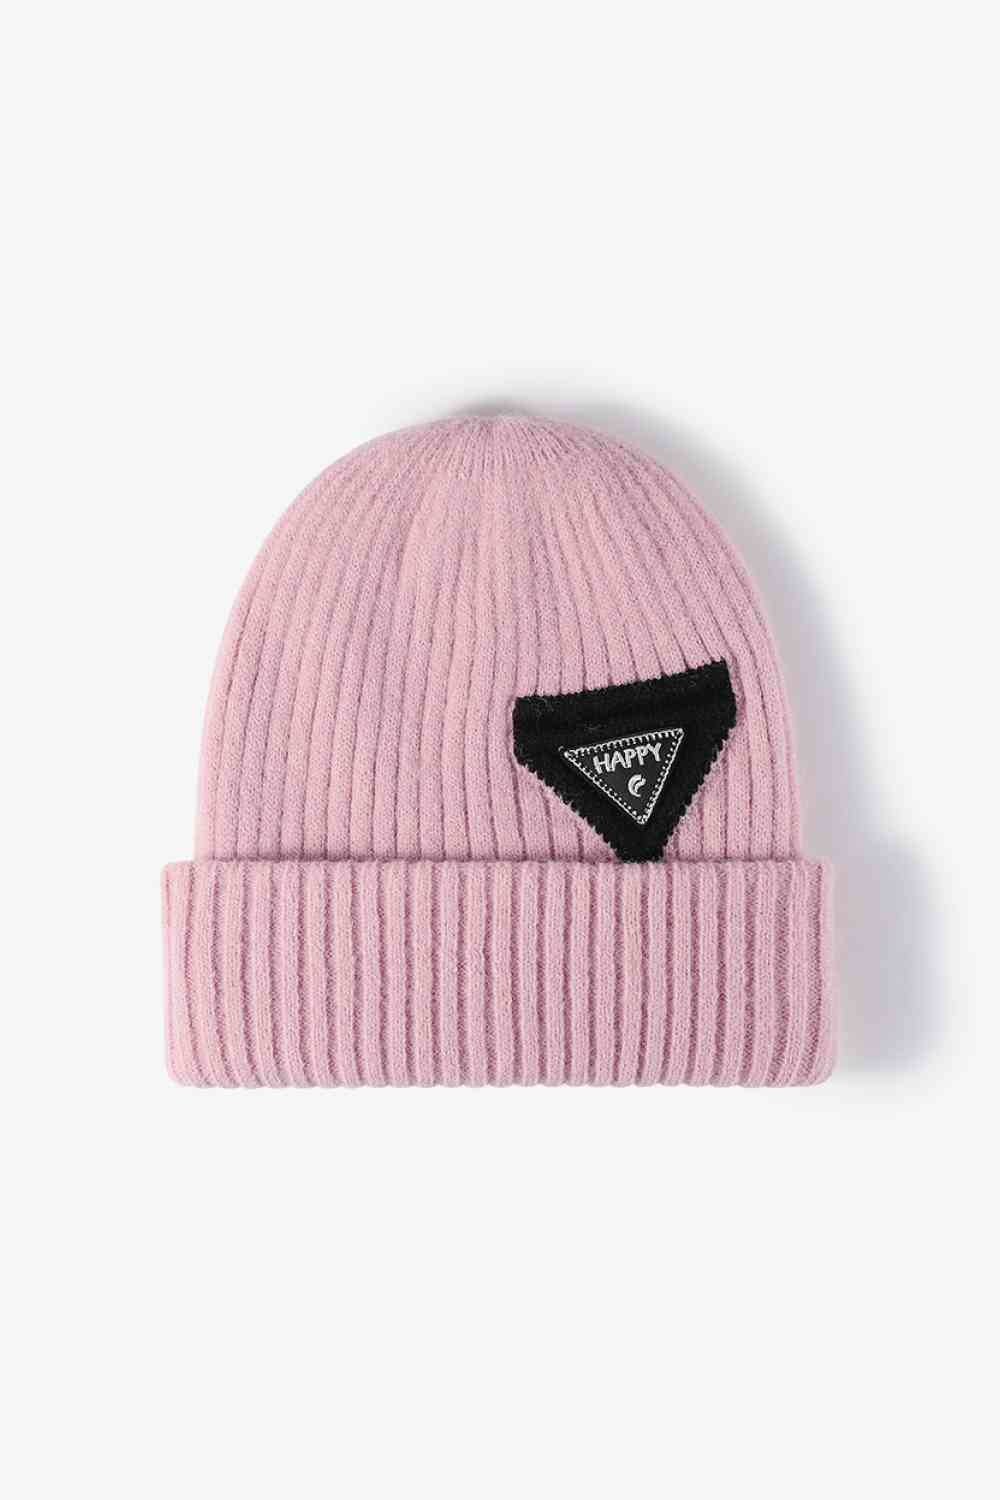 HAPPY Contrast Beanie Pink One Size